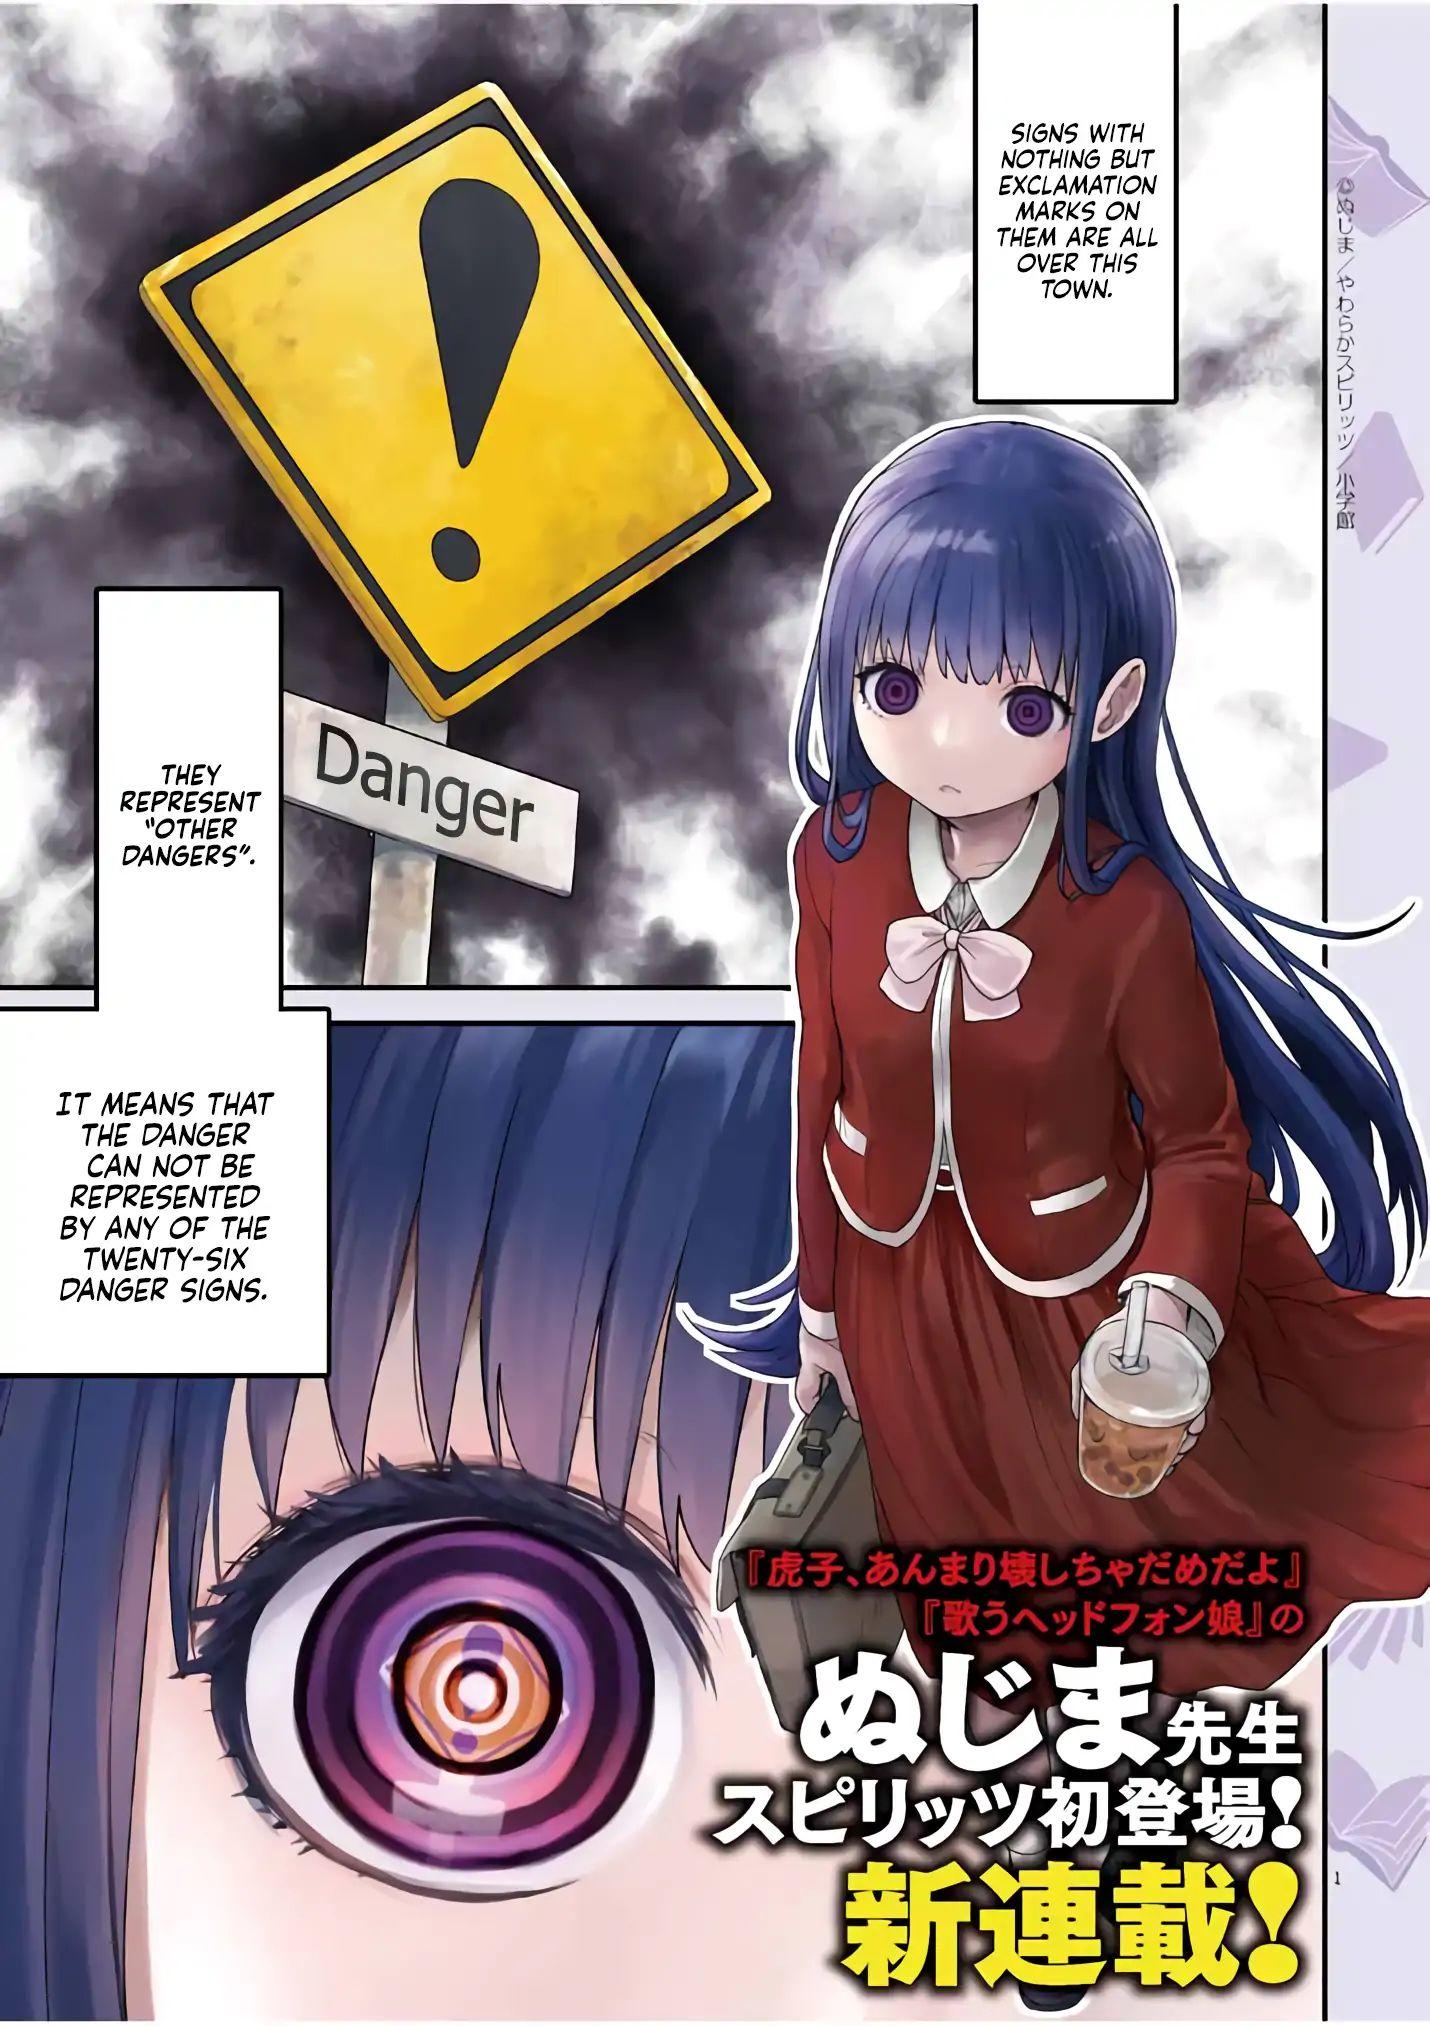 Read Mysteries, Maidens, And Mysterious Disappearances 32 - Oni Scan